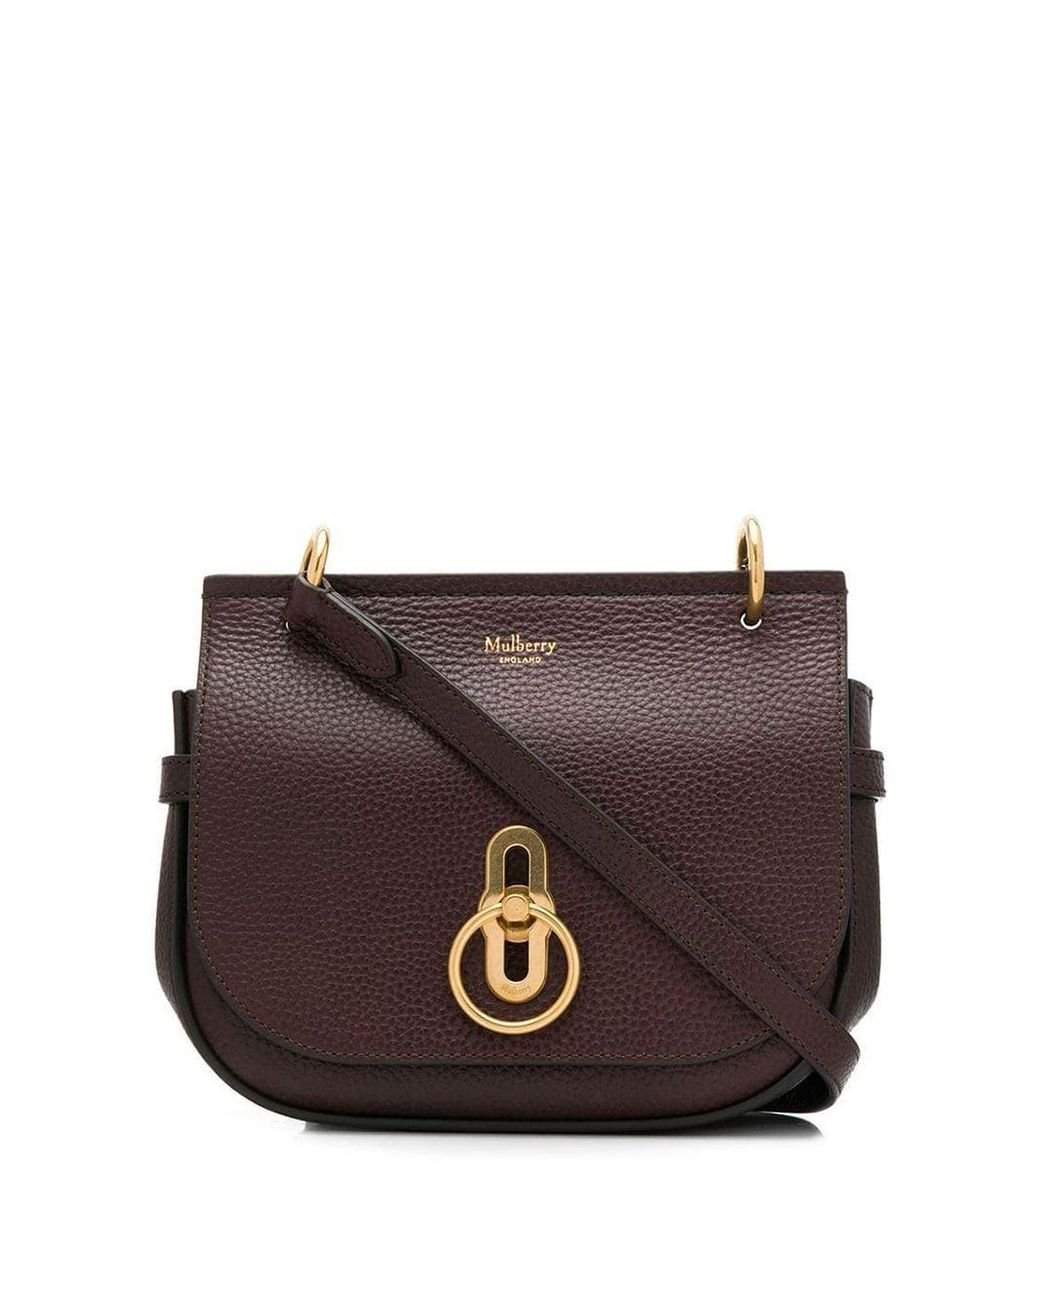 Mulberry Leather Small Amberley Crossbody Bag in Brown - Lyst